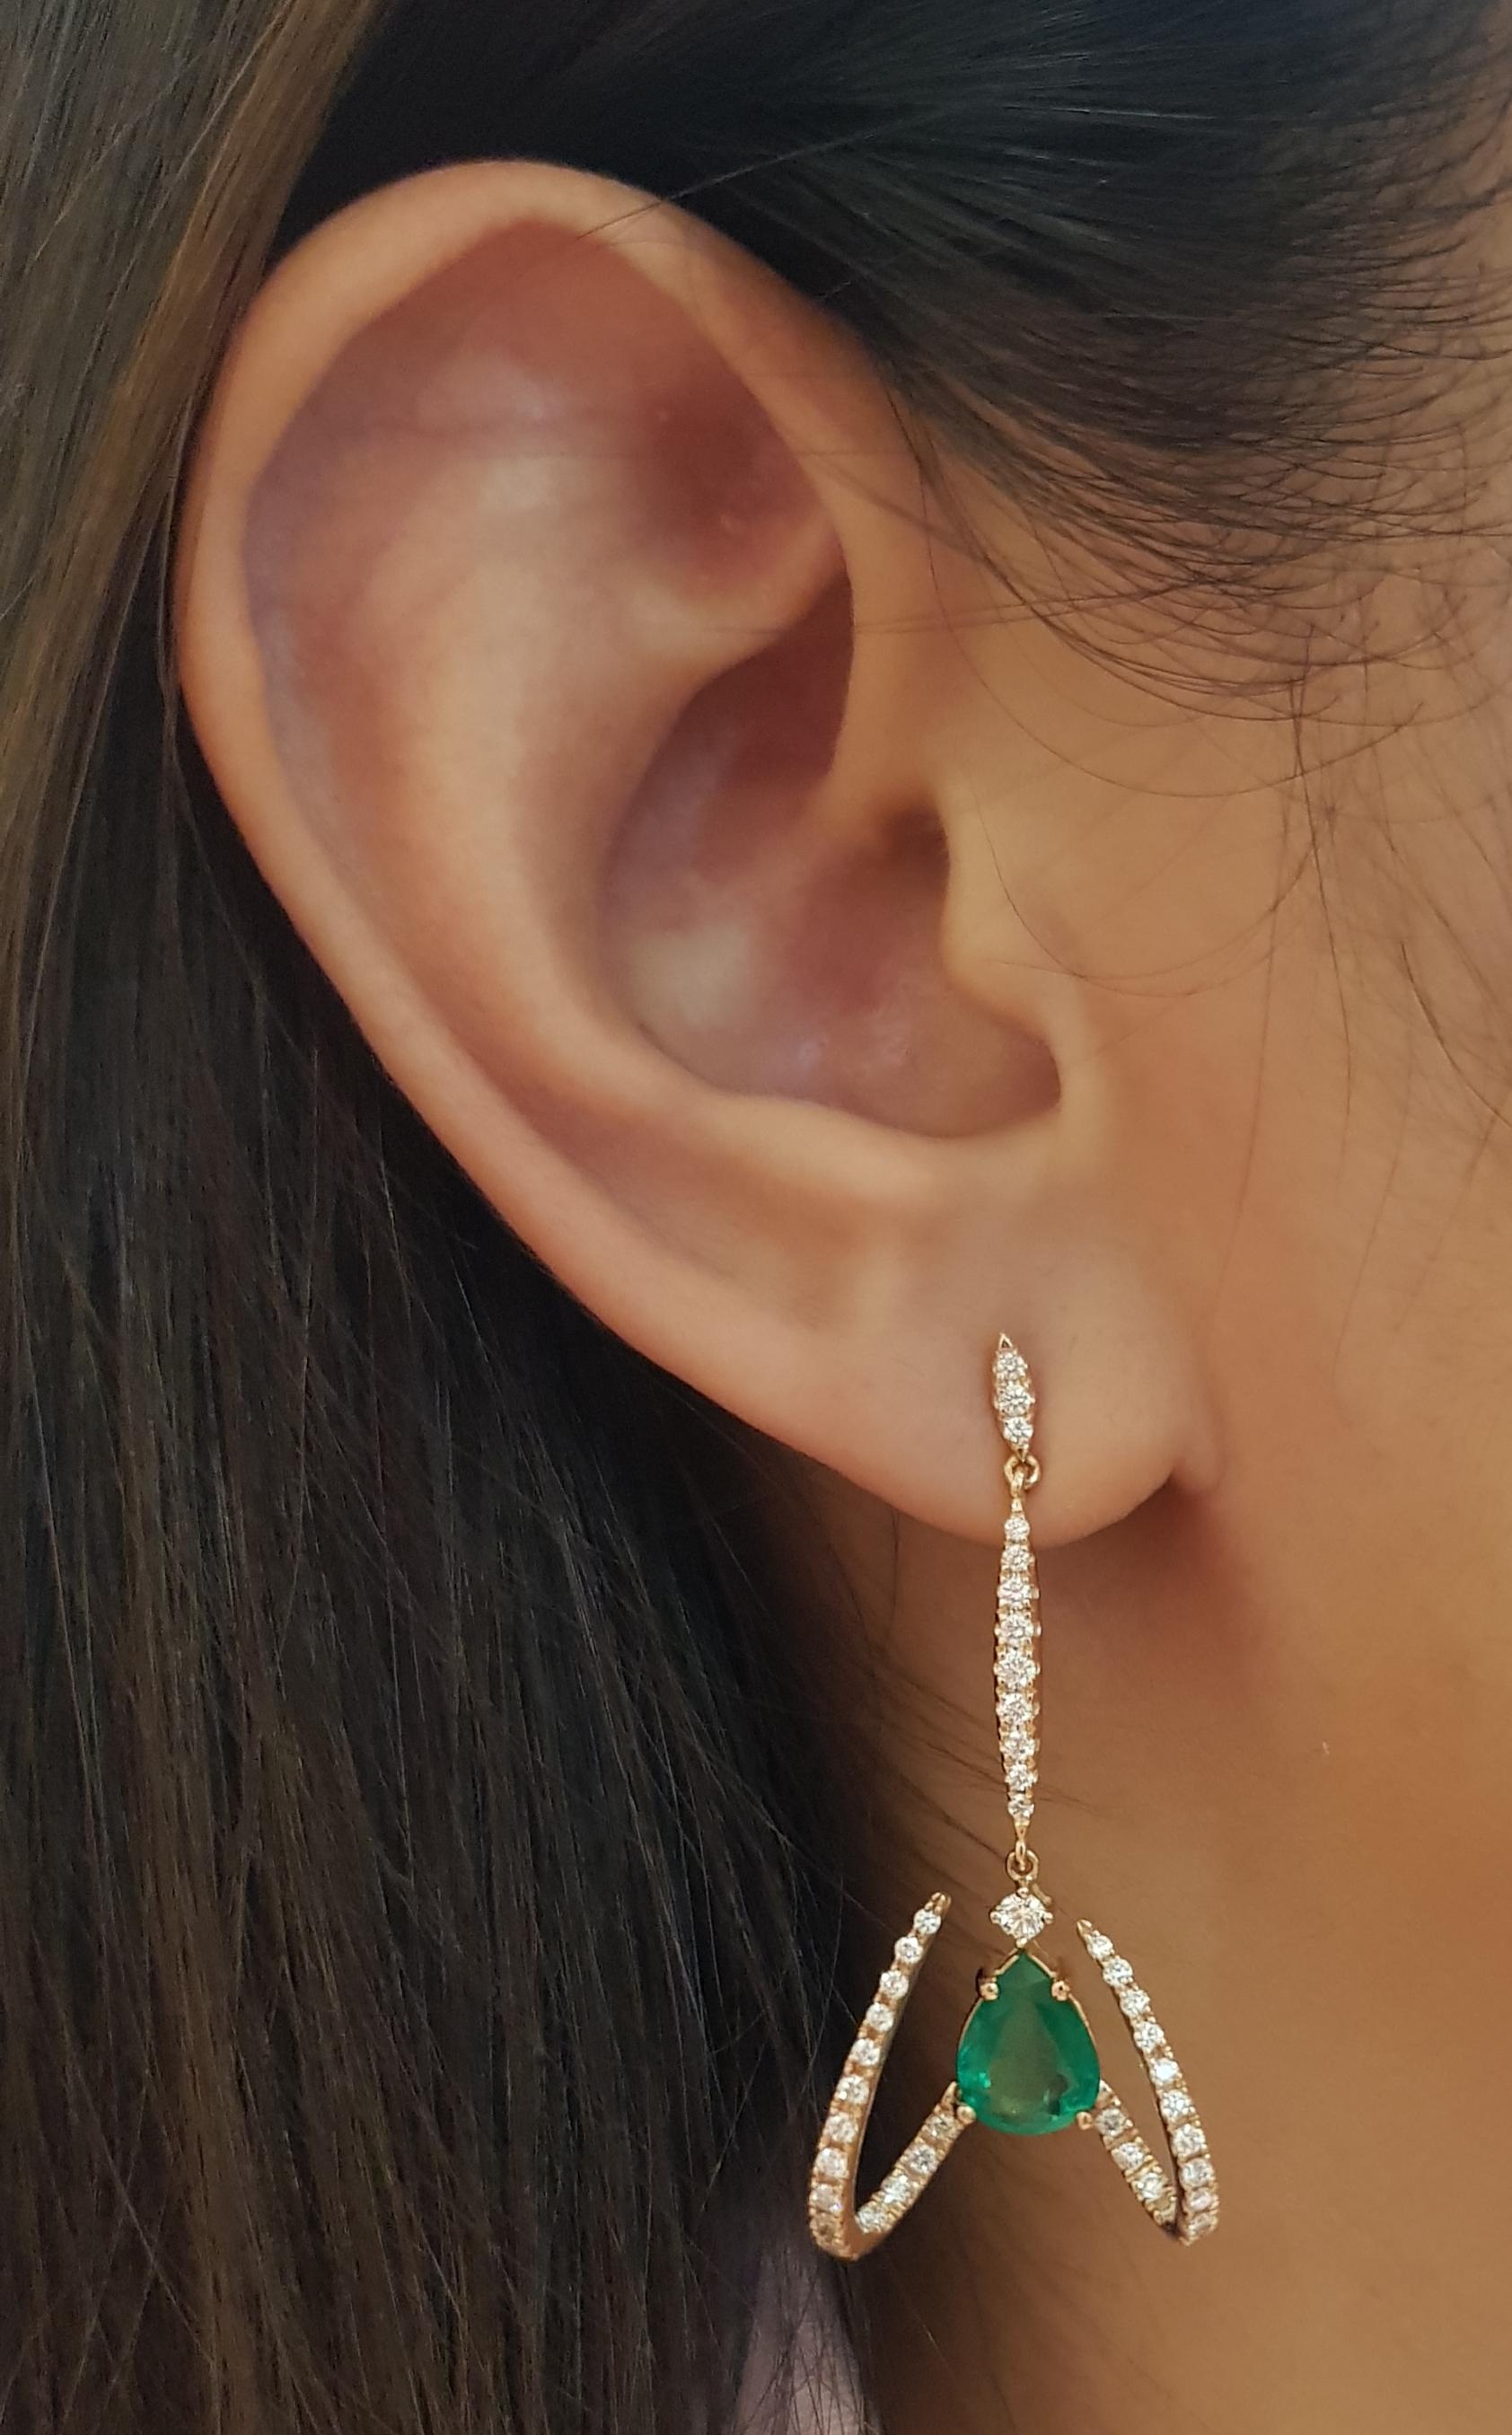 Emerald 2.30 carats with Diamond 0.91 carat Earrings set in 18 Karat Rose Gold Settings 

Width: 1.8 cm 
Length: 4.2 cm
Total Weight: 7.22 grams

(KENNY) & SHAR-LINN, KAVANT & SHARART IS A FINE JEWELRY BRAND TAILORED  TO MEET THE DISCERNING NEEDS OF